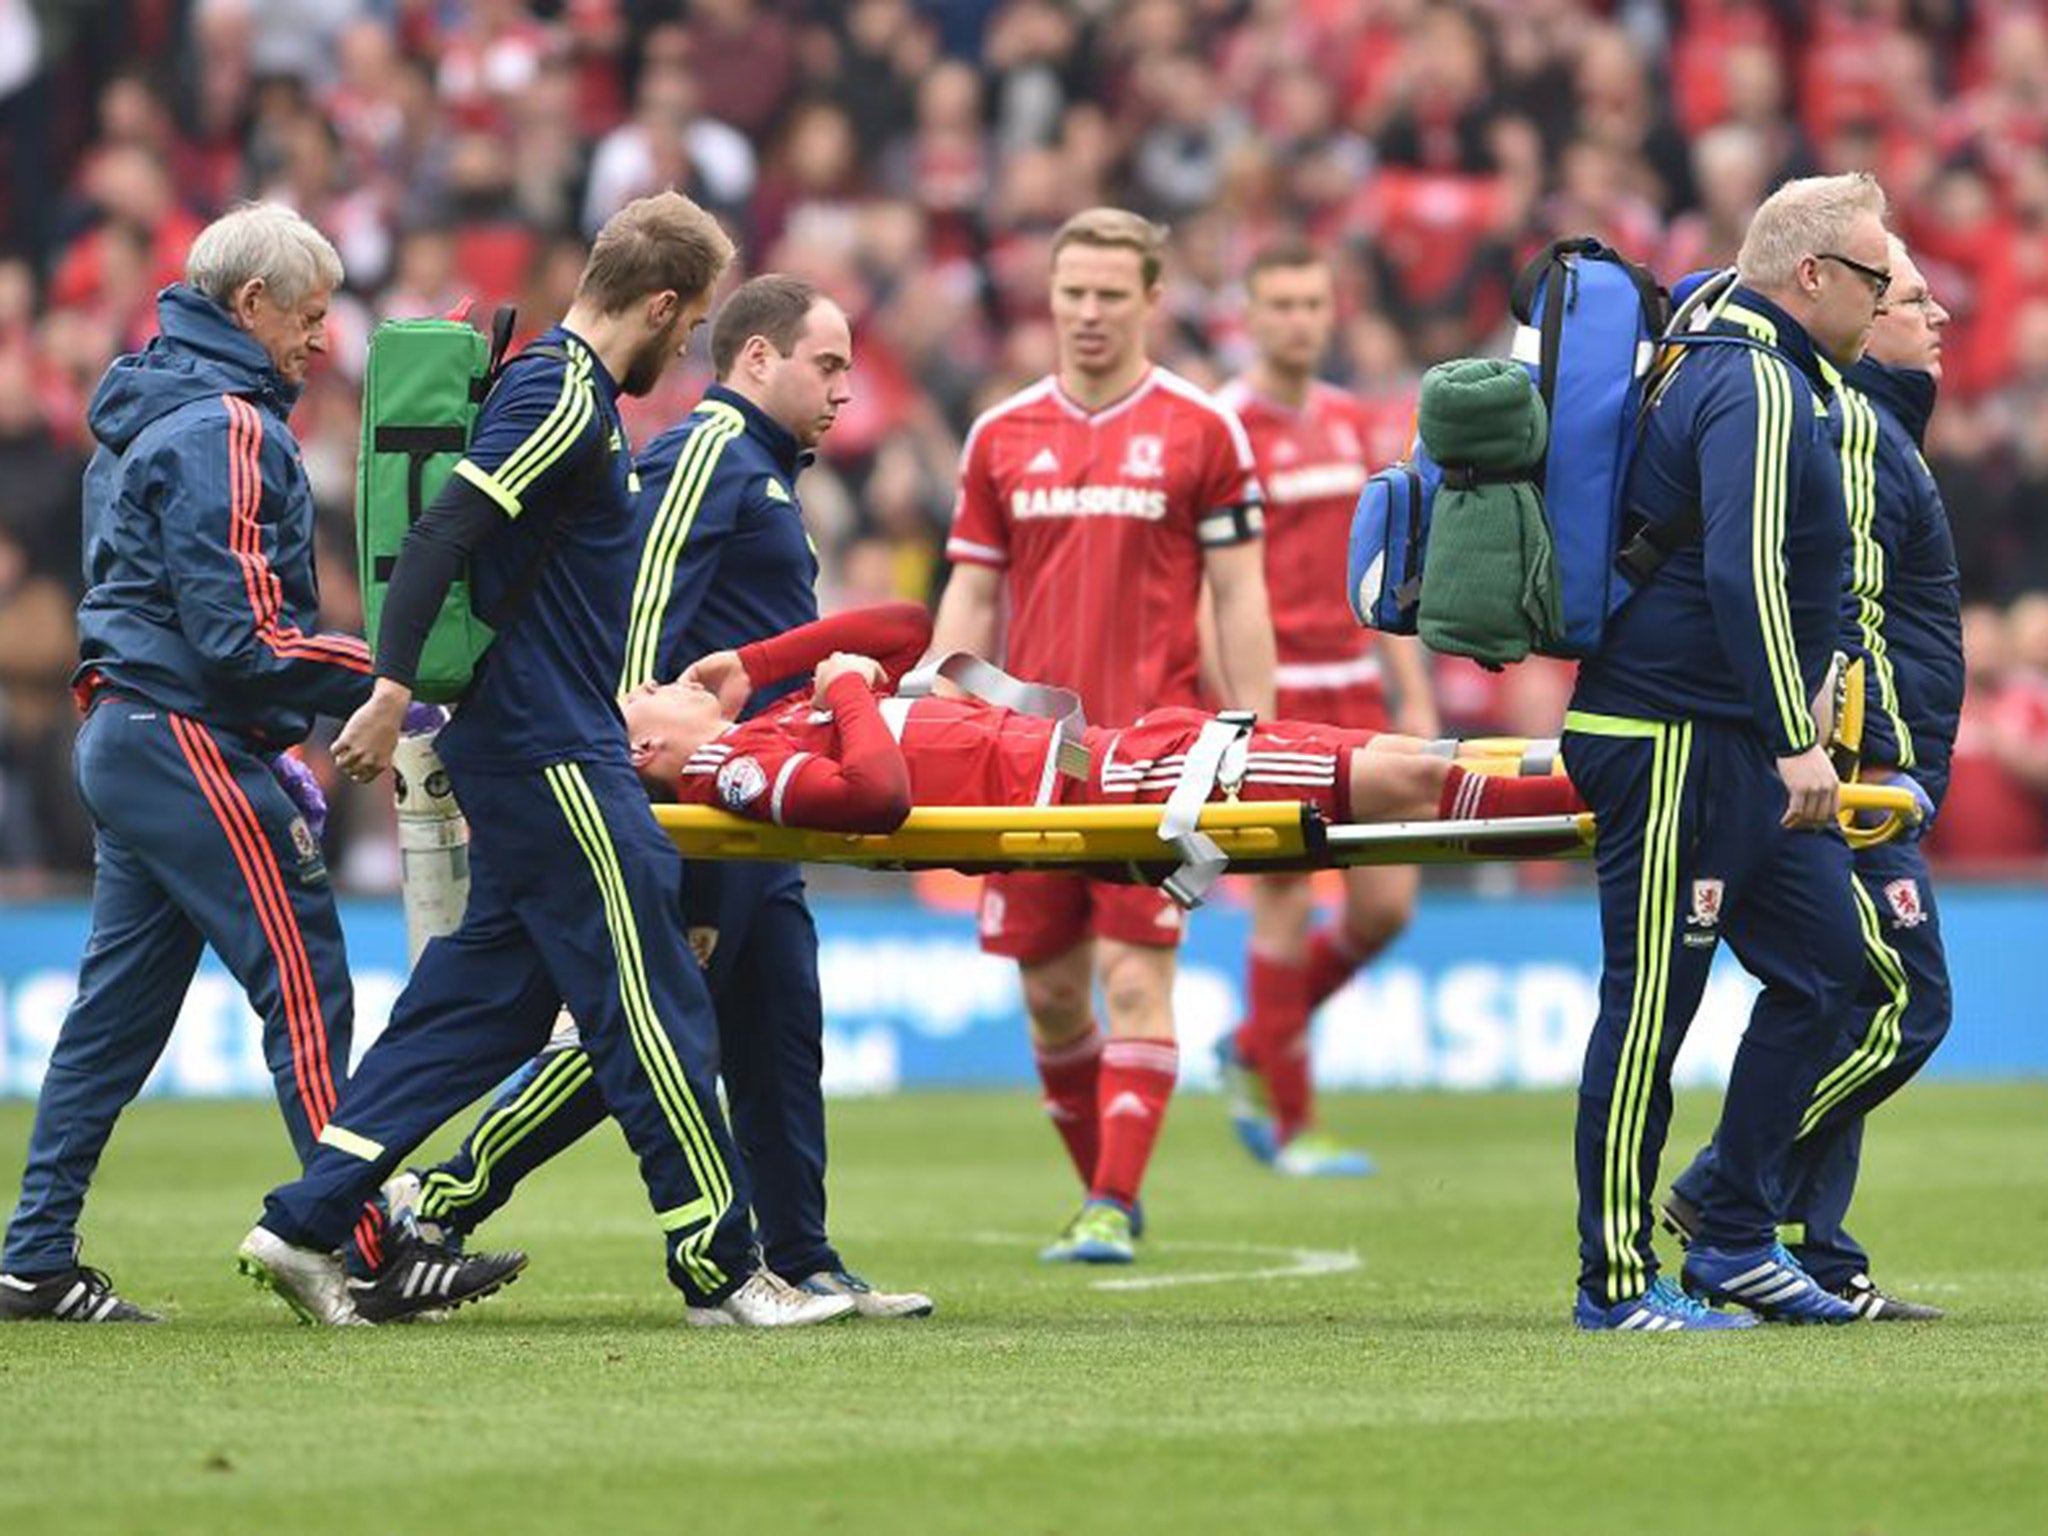 Gaston Ramirez is carried off with injury during Middlesbrough's 1-1 draw with Brighton